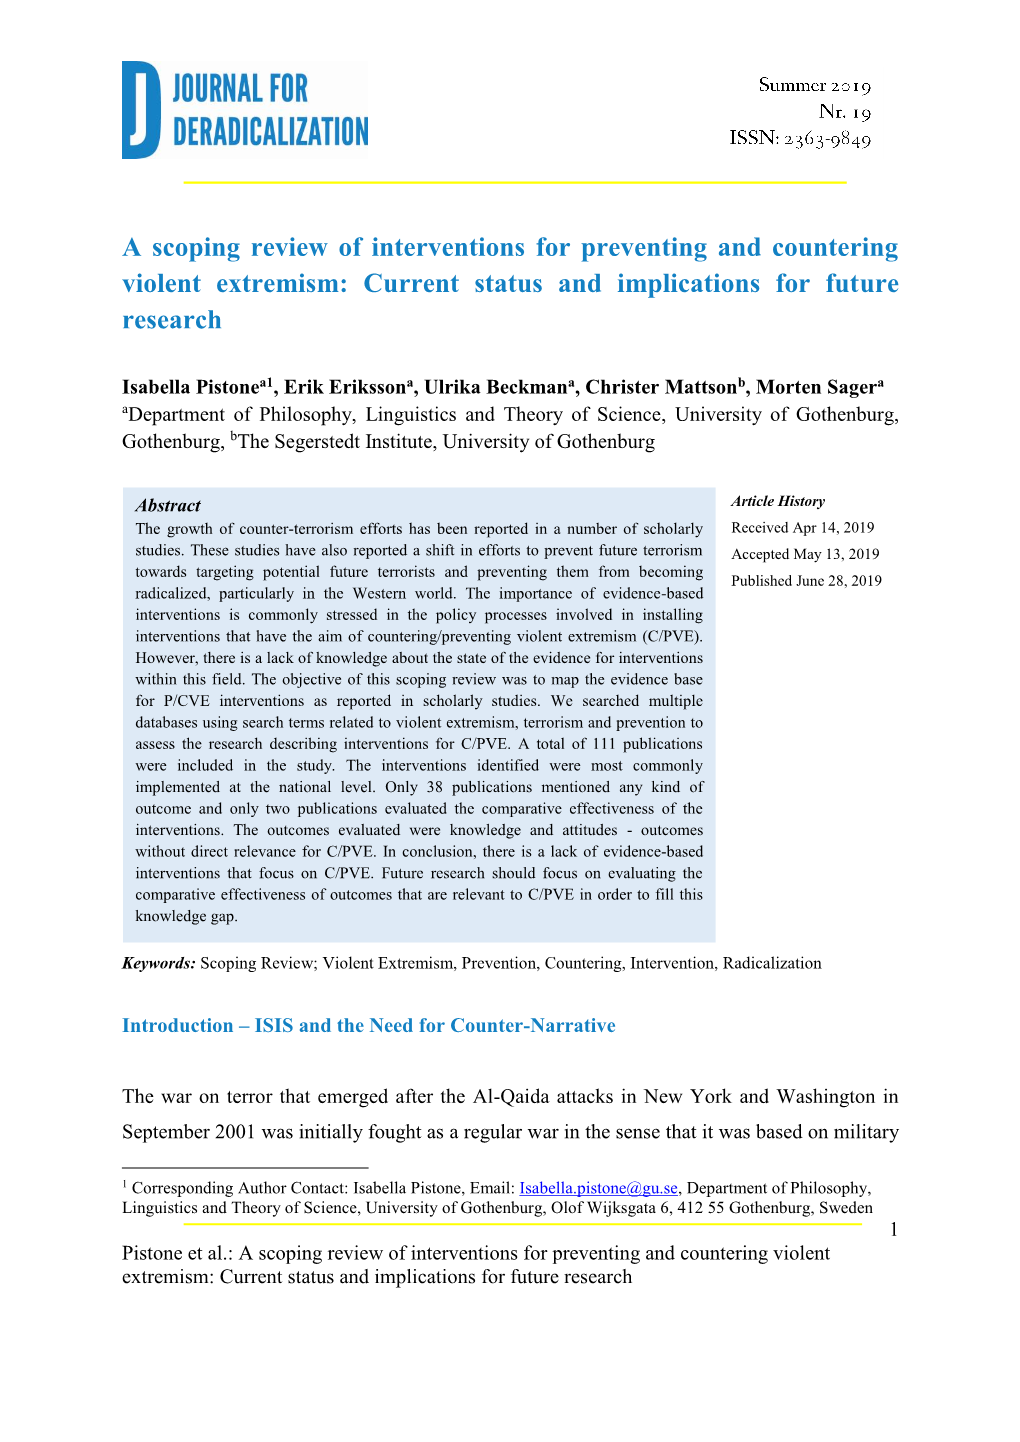 A Scoping Review of Interventions for Preventing and Countering Violent Extremism: Current Status and Implications for Future Research